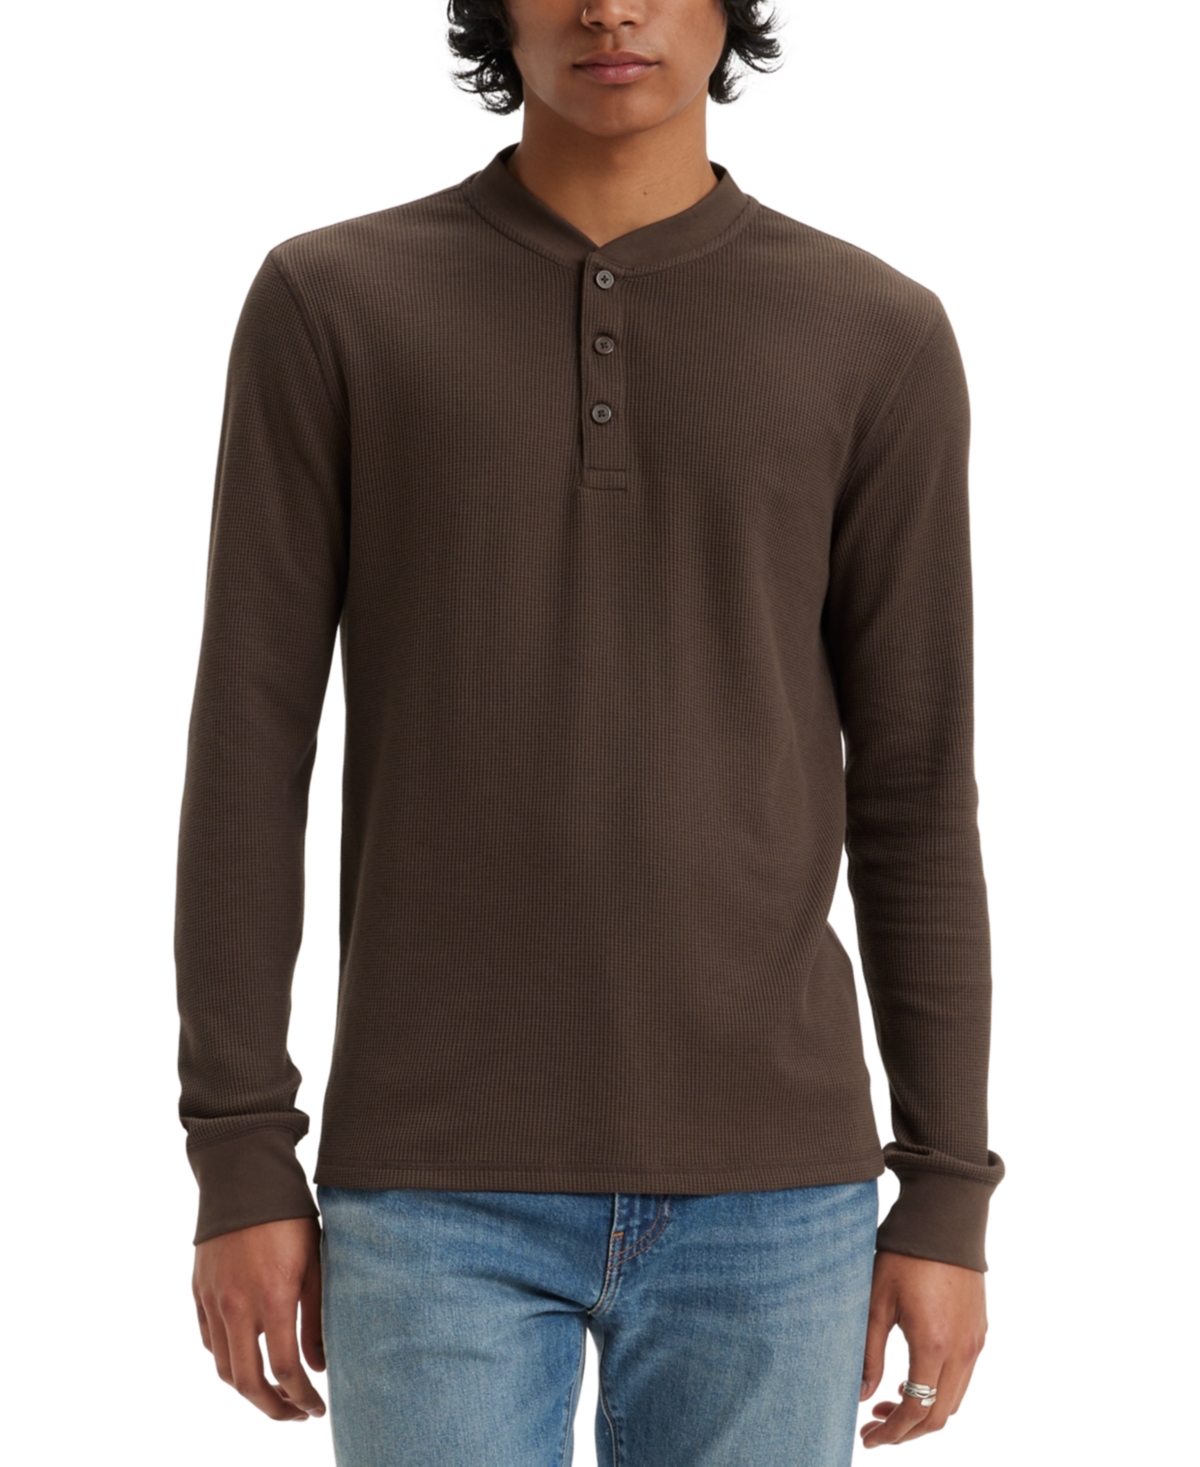 Levi's Levis Men's Long-sleeve Thermal Henley Shirt In Chocolate Brown